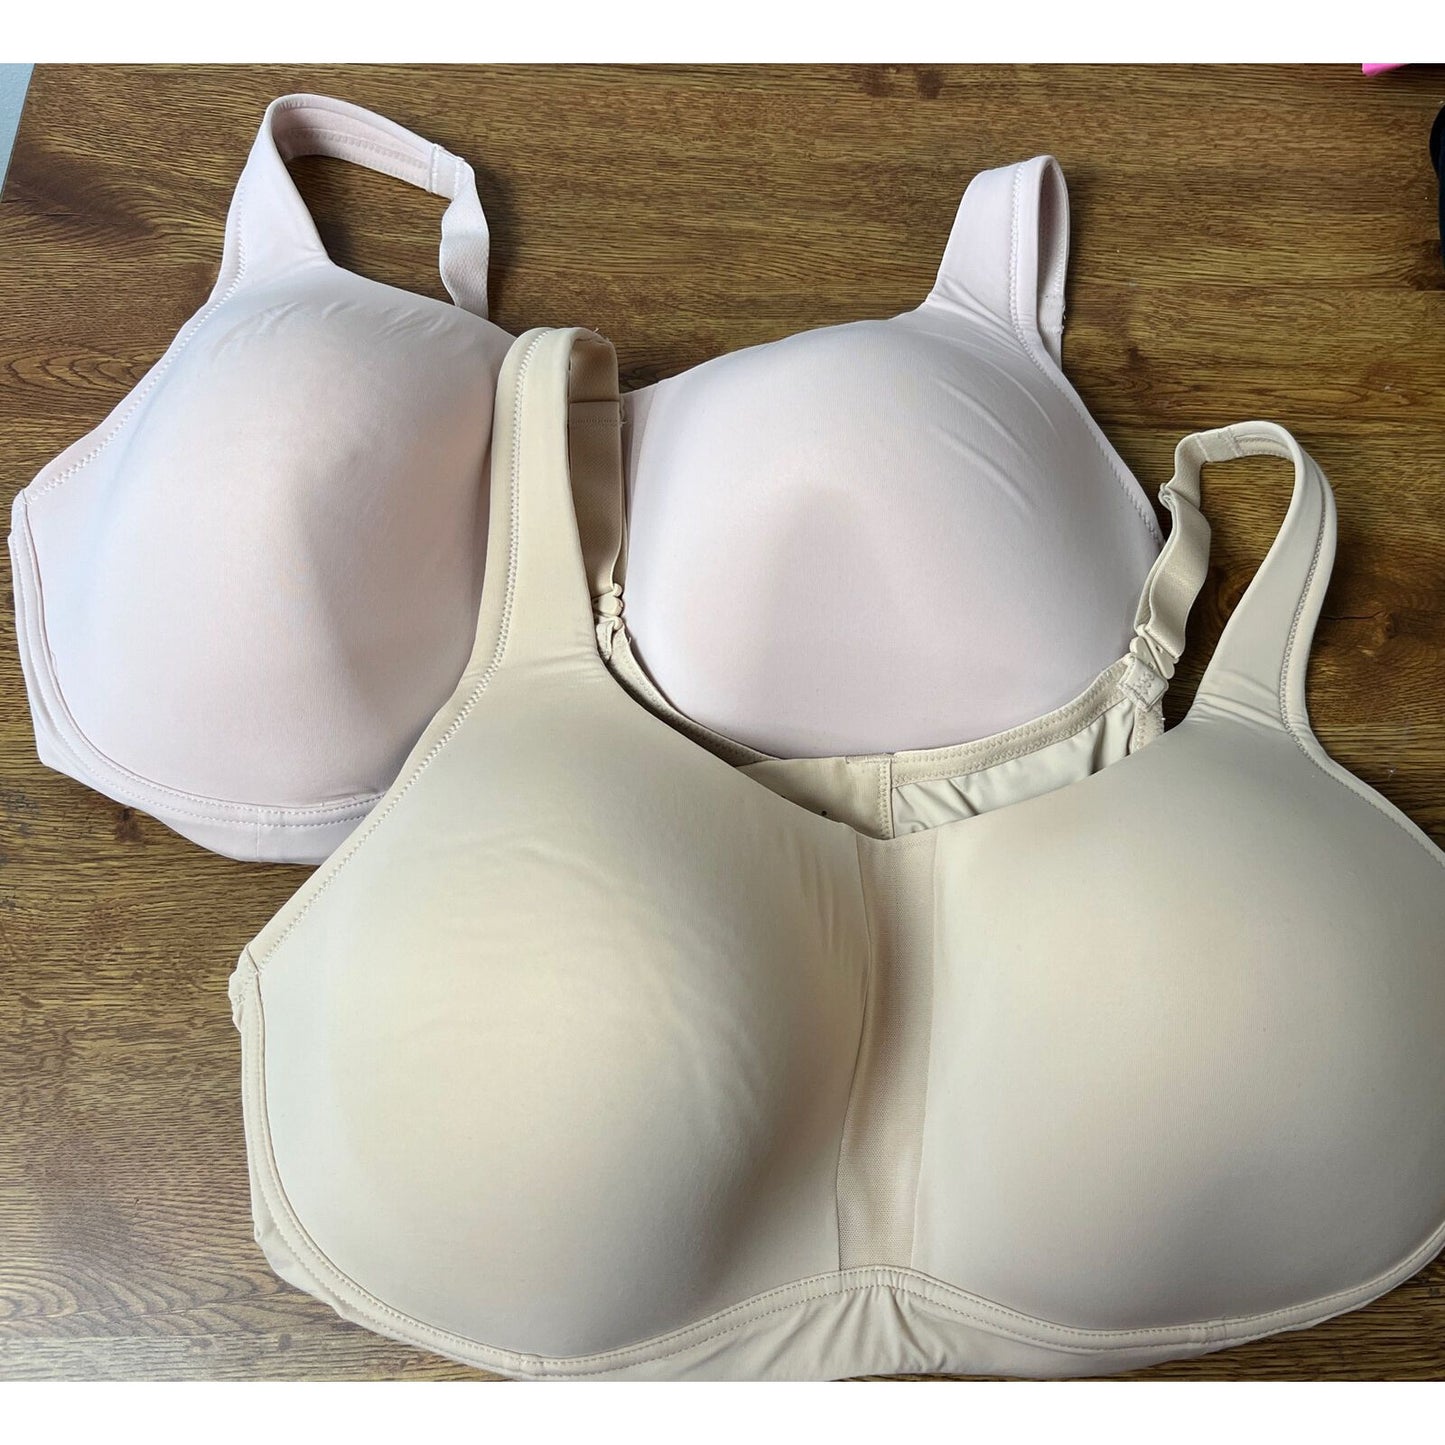 Cuddl Duds Set of 2 Smooth Micro Lightly Lined Scoop Neck Bra FRAPPE/ROSEDUST 3X